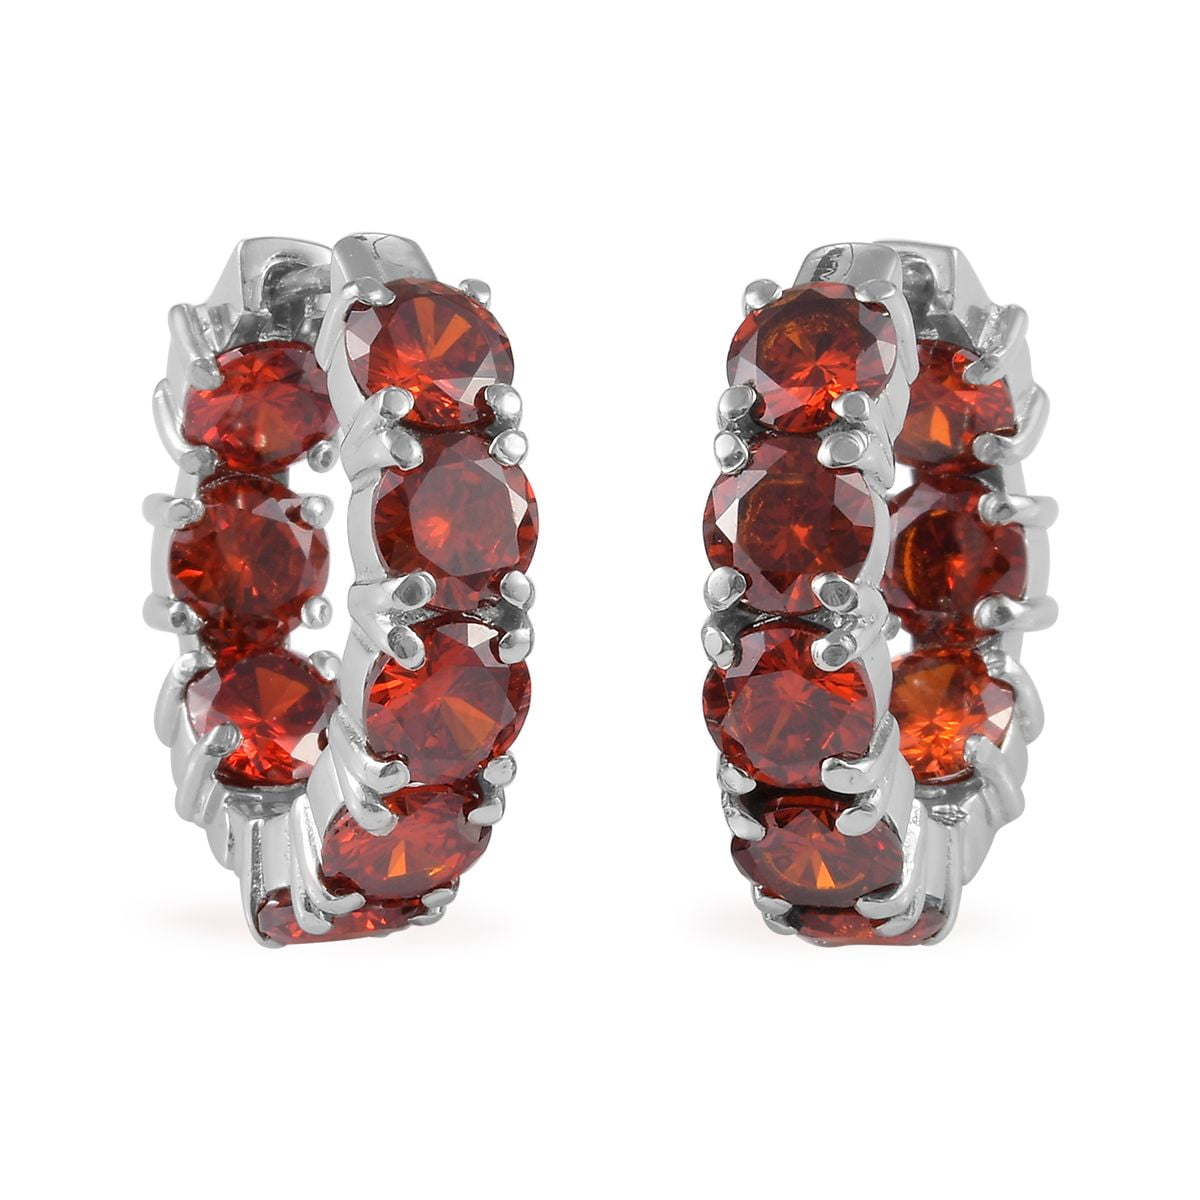 Orange fruit surgical steel earrings 316 Stainless steel earrings gift Fresh orange earrings Picture under glass dome!!!!